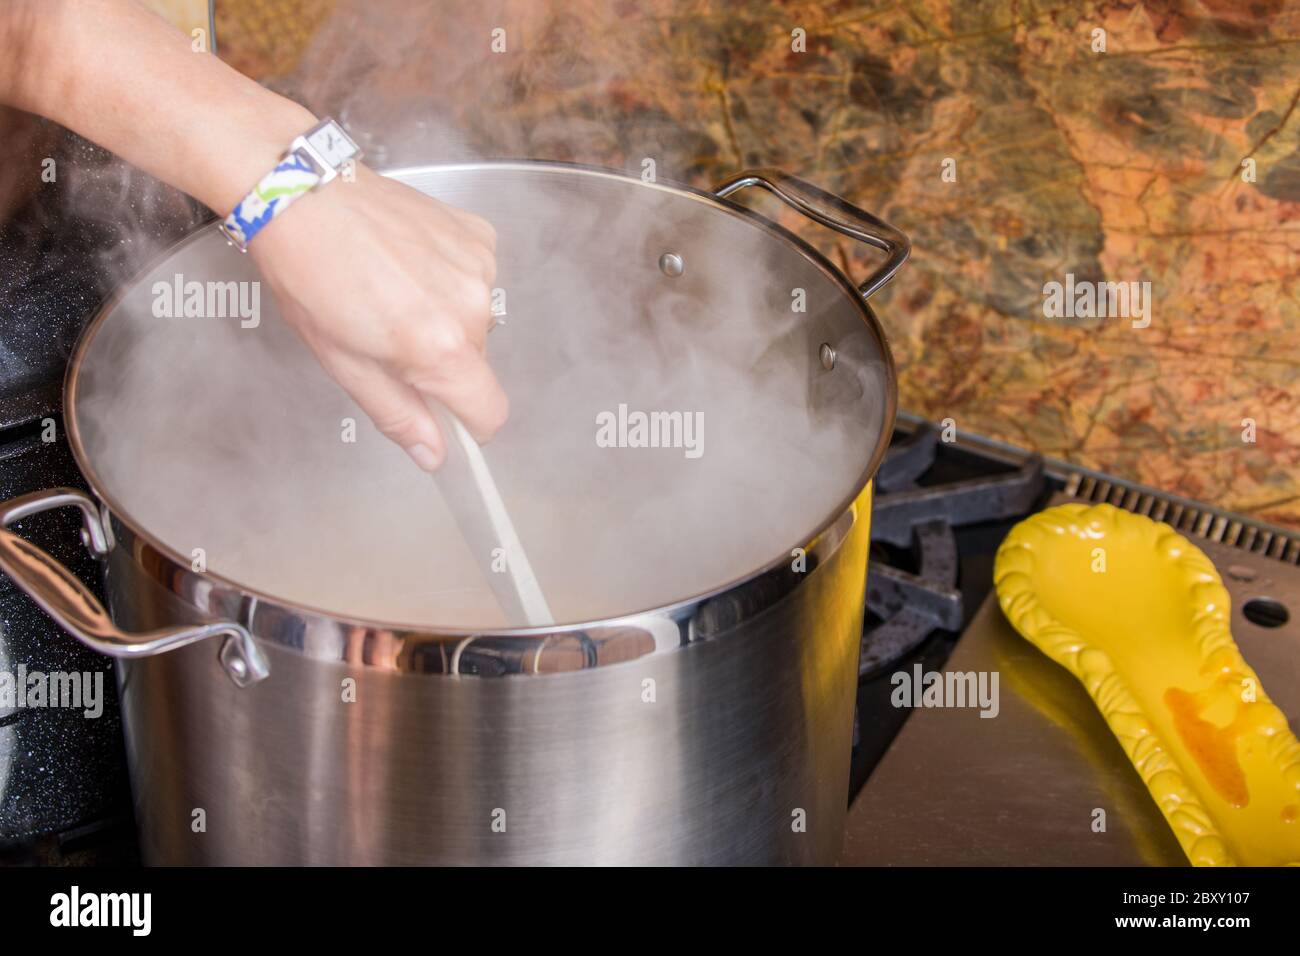 https://c8.alamy.com/comp/2BXY107/woman-stirring-a-boiling-pot-of-apricot-jam-with-heavy-steam-2BXY107.jpg